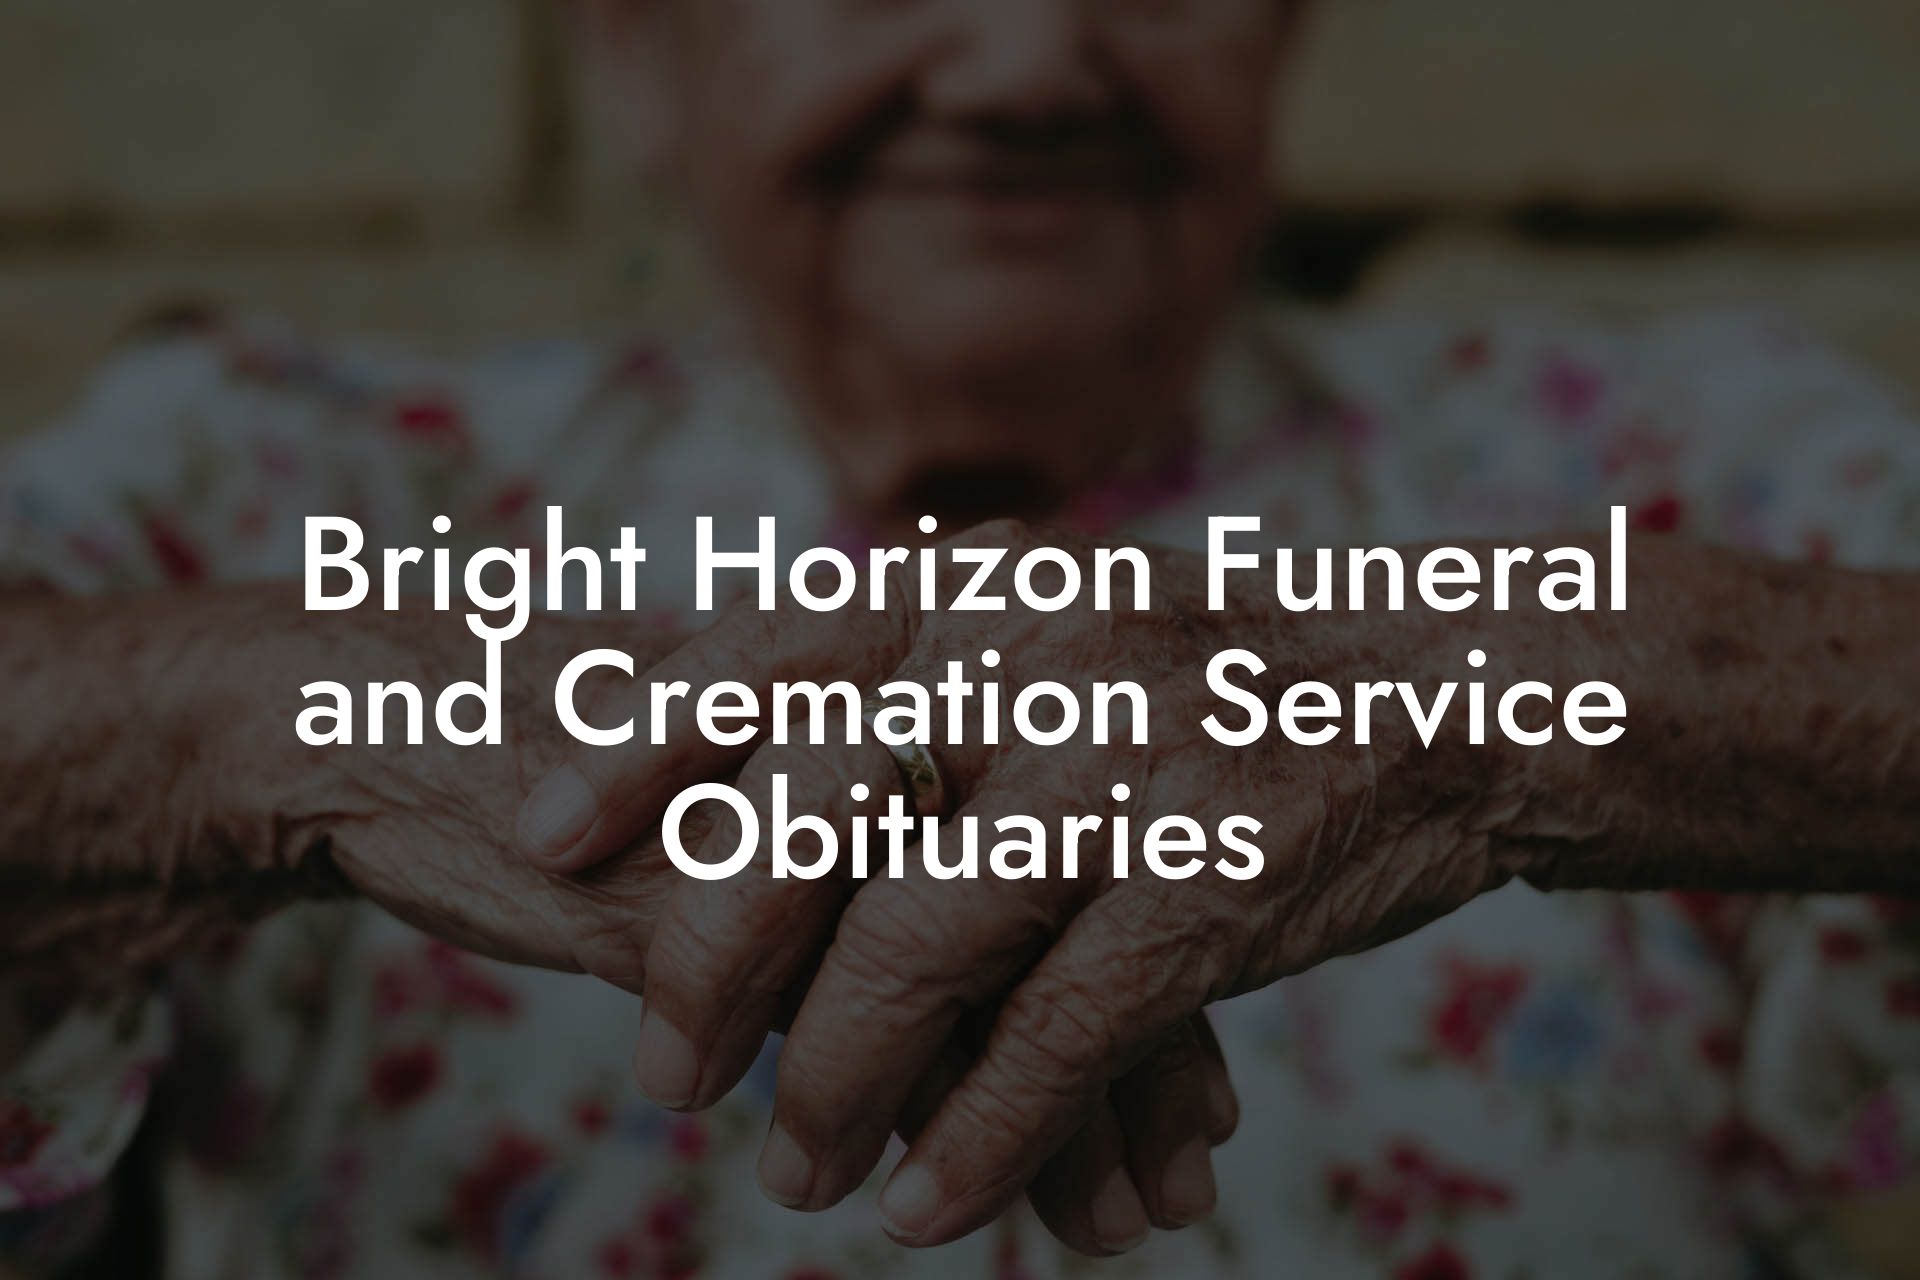 Bright Horizon Funeral and Cremation Service Obituaries